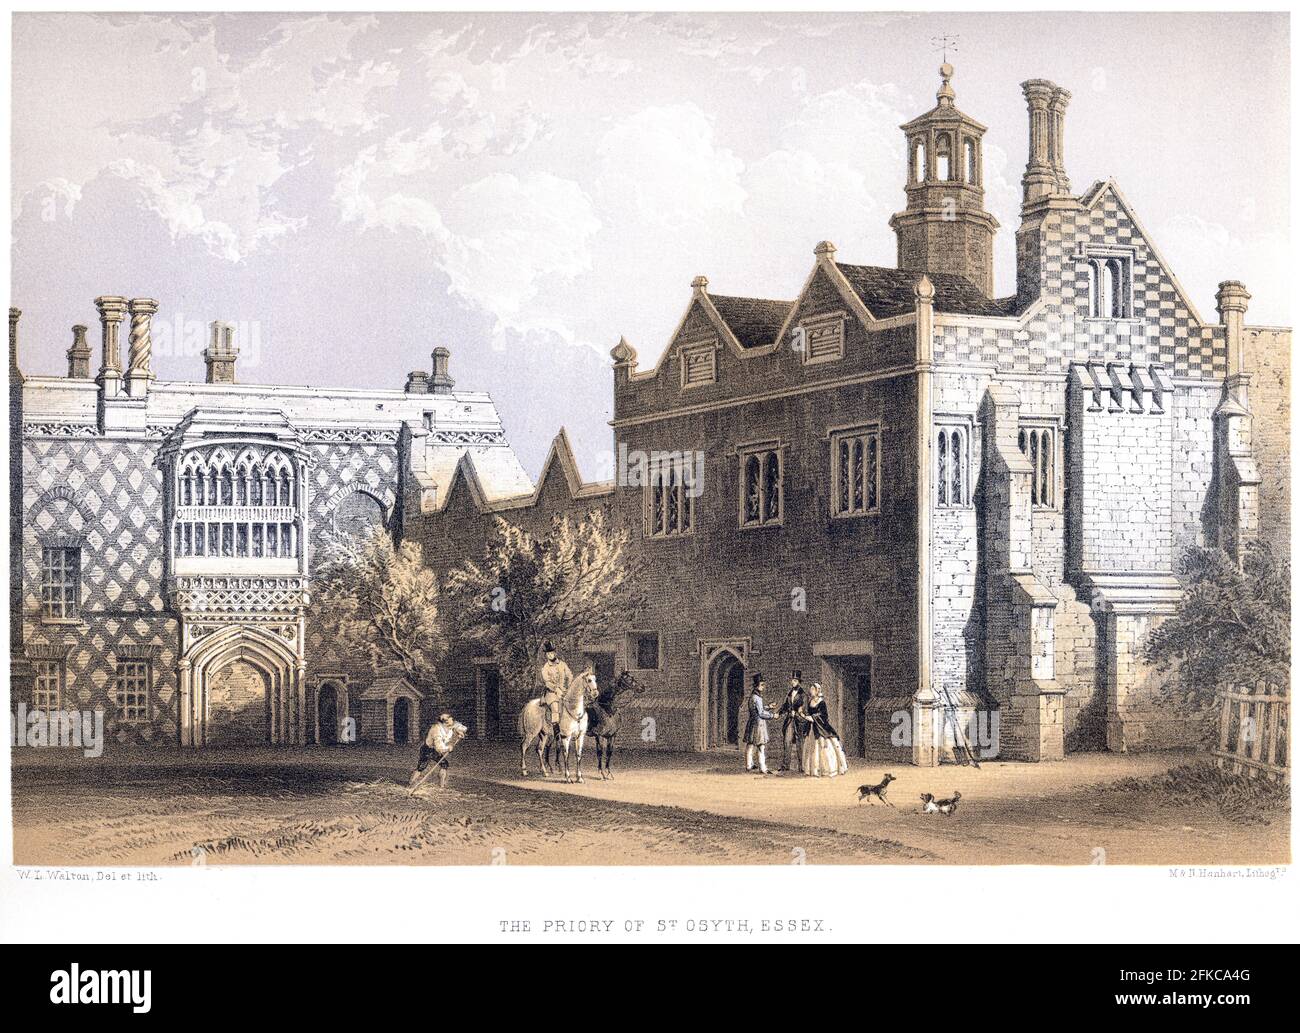 A lithotint of The Priory of St Osyth (St Osyth's Abbey), Essex UK scanned at high resolution from a book printed in 1858. Stock Photo